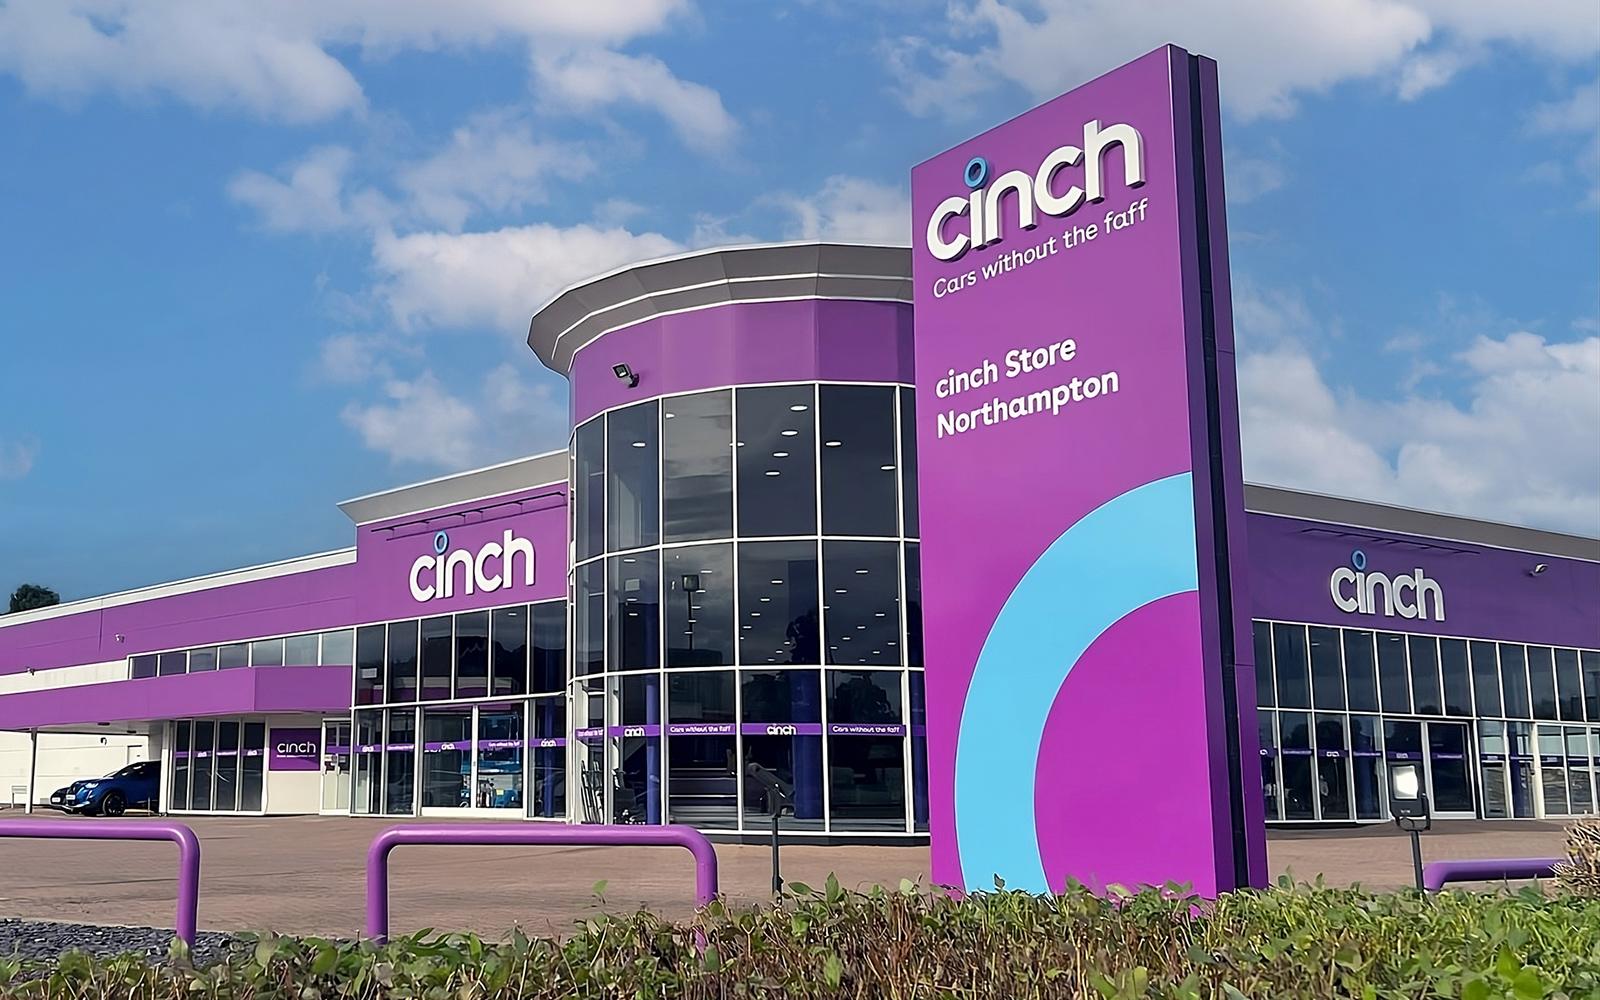 The outside of the cinch Northampton store